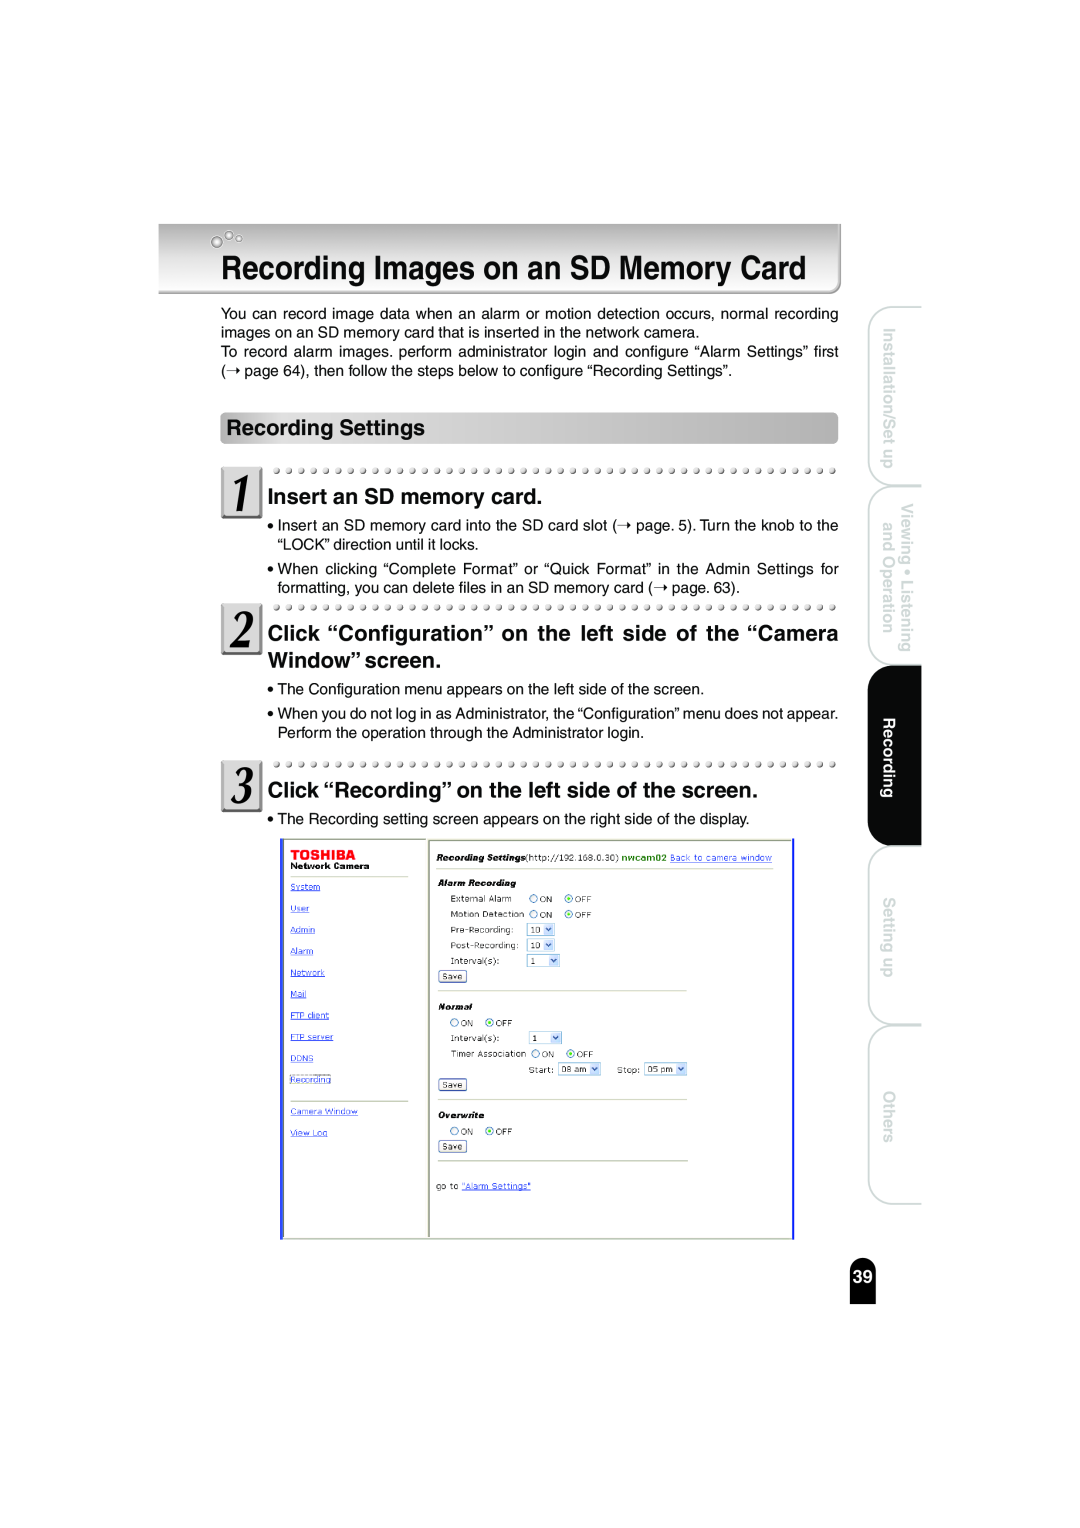 Toshiba IK-WB02A Recording Images on an SD Memory Card, Recording Settings Insert an SD memory card, Installation/Set up 